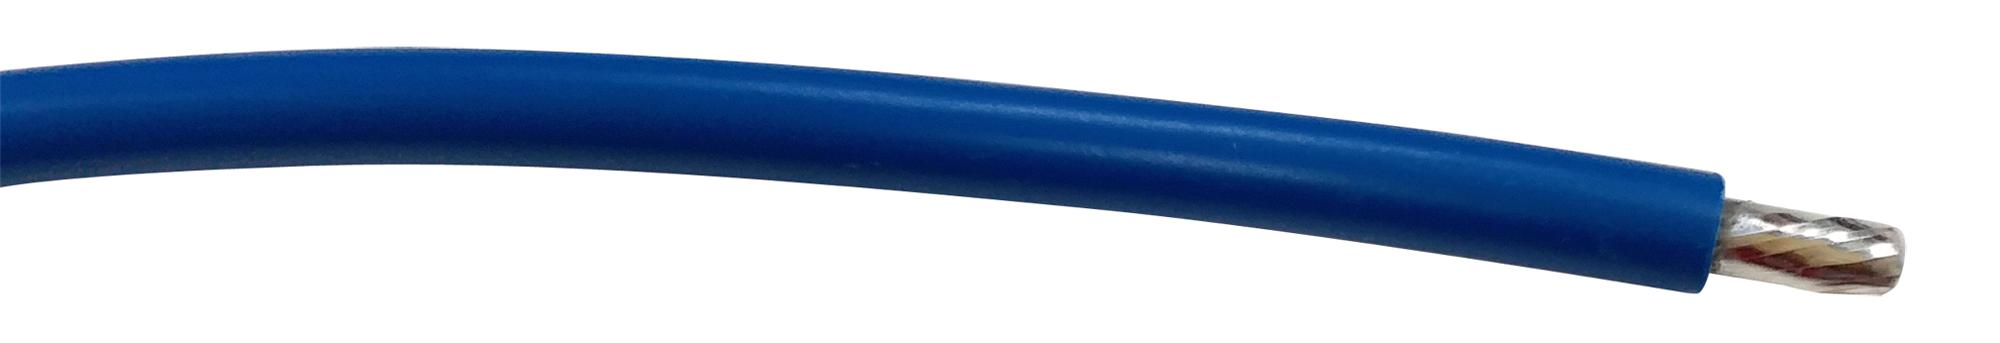 PP002568 CABLE WIRE, 18AWG, BLUE, 305M PRO POWER